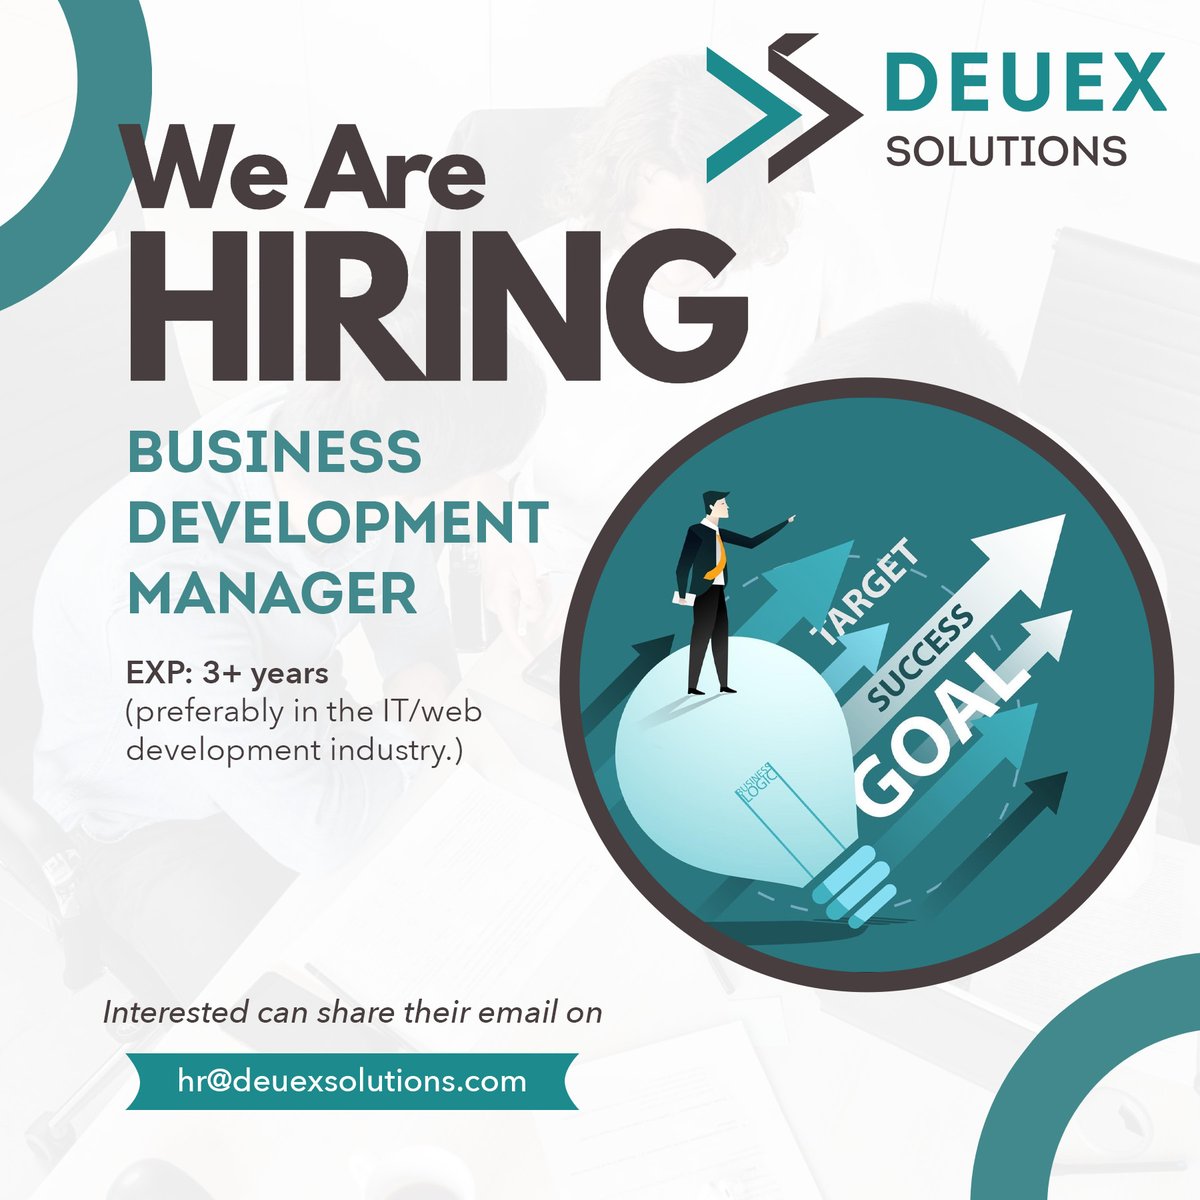 Seeking a dynamic Business Development Manager to drive growth and innovation at Deuex Solutions Pvt. Ltd.

Share Your CV on hr@deuexsolutions.com

#hiring #resume #vacancy #businessdevelopmentmanager #itsales #job #businessanalyst